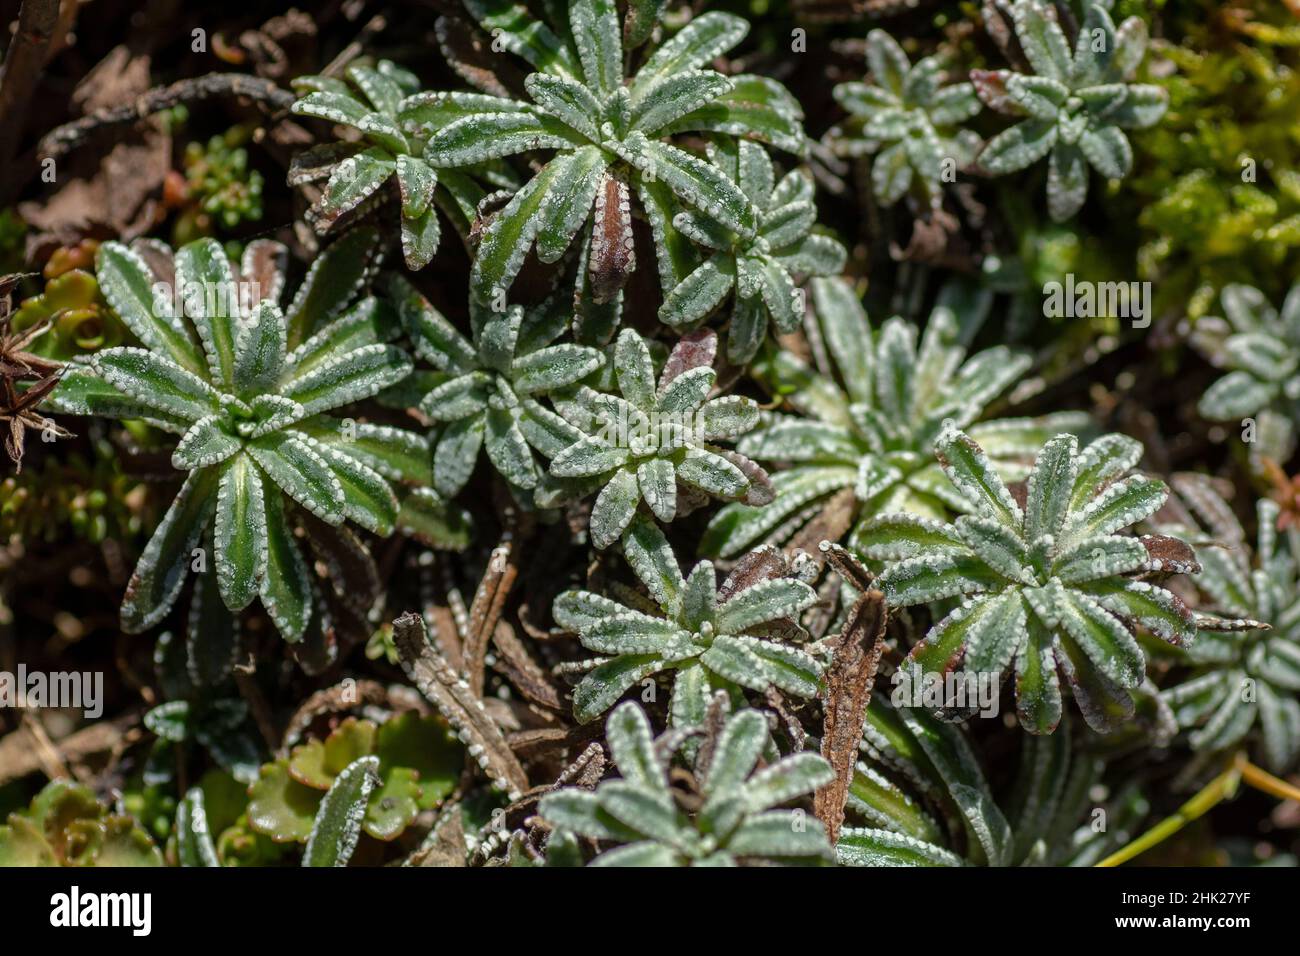 The crusted-leaved saxifraga (Saxifraga crustata) or silver saxifrage growing in the garden. Stock Photo